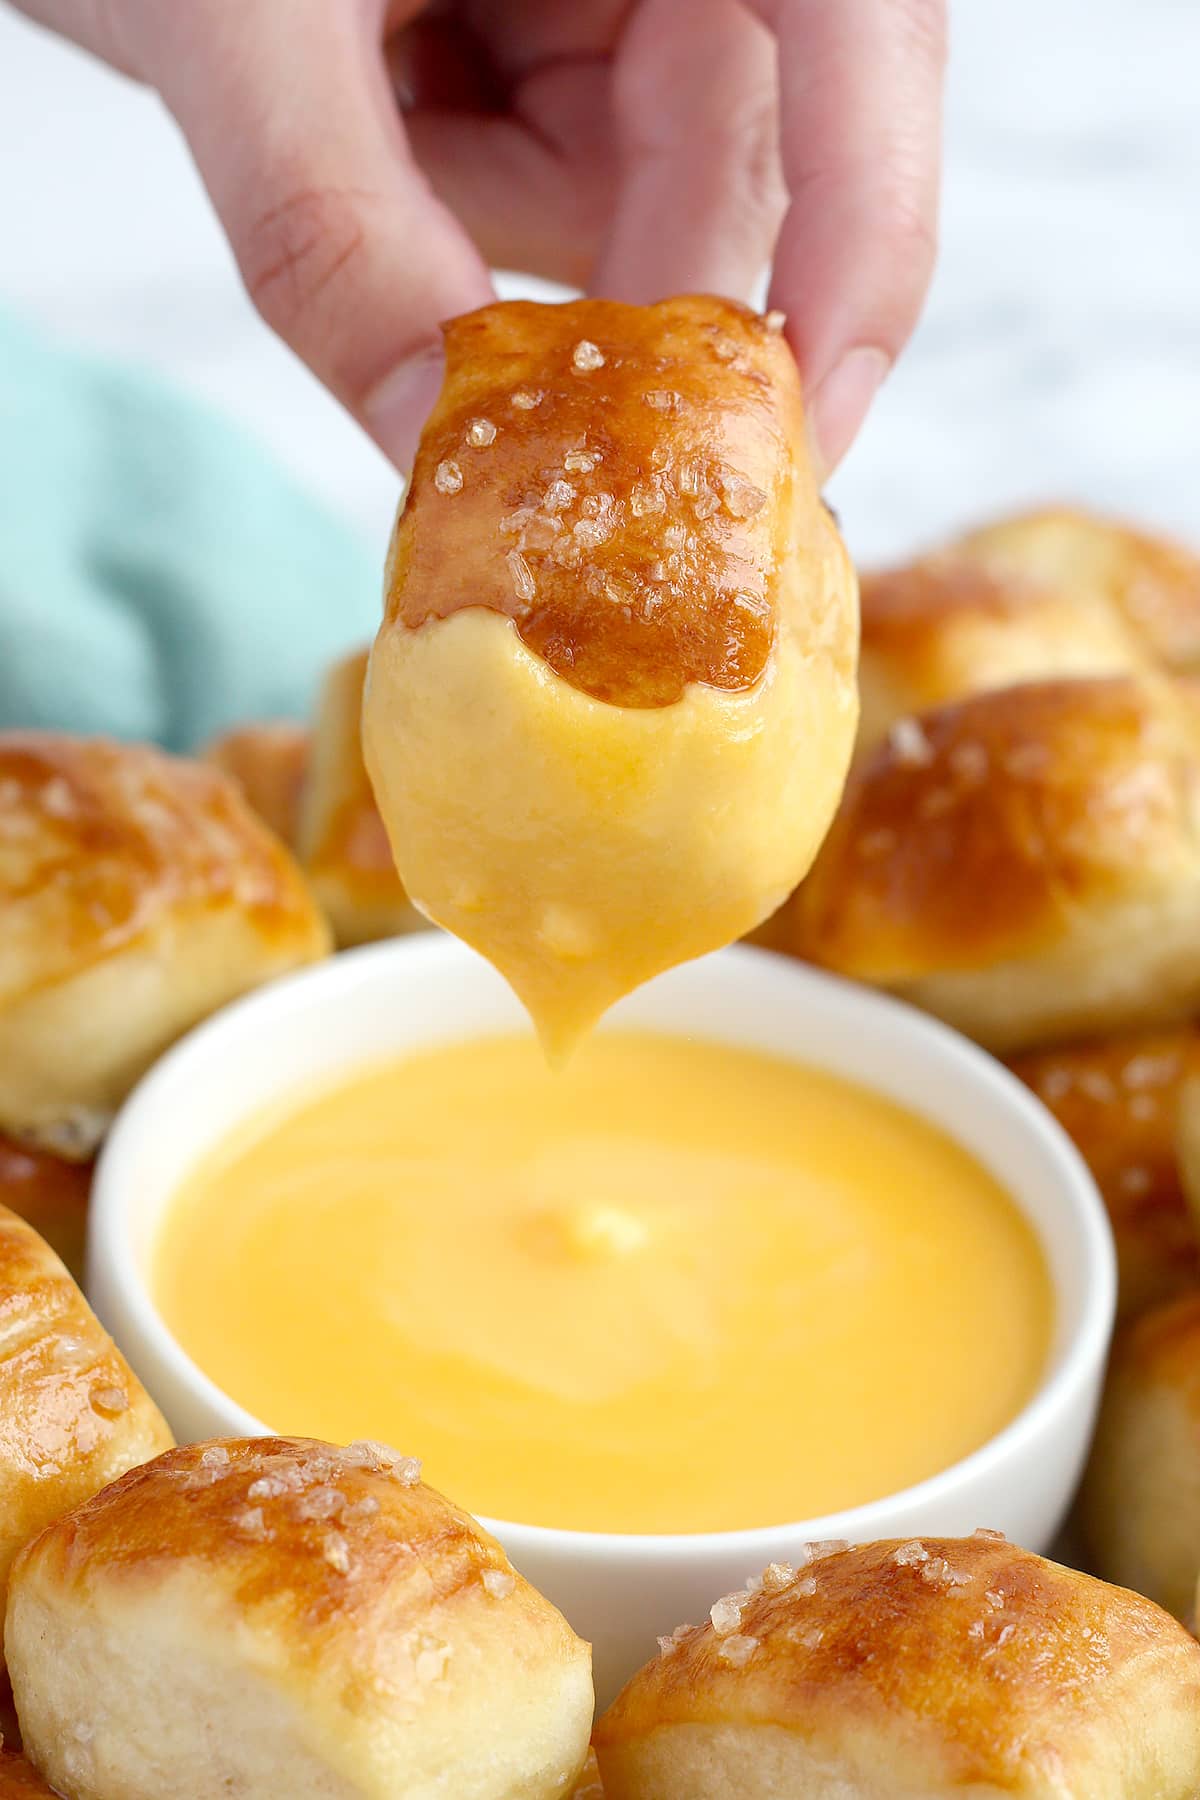 A soft pretzel bite dipped in a bowl of cheese dip.